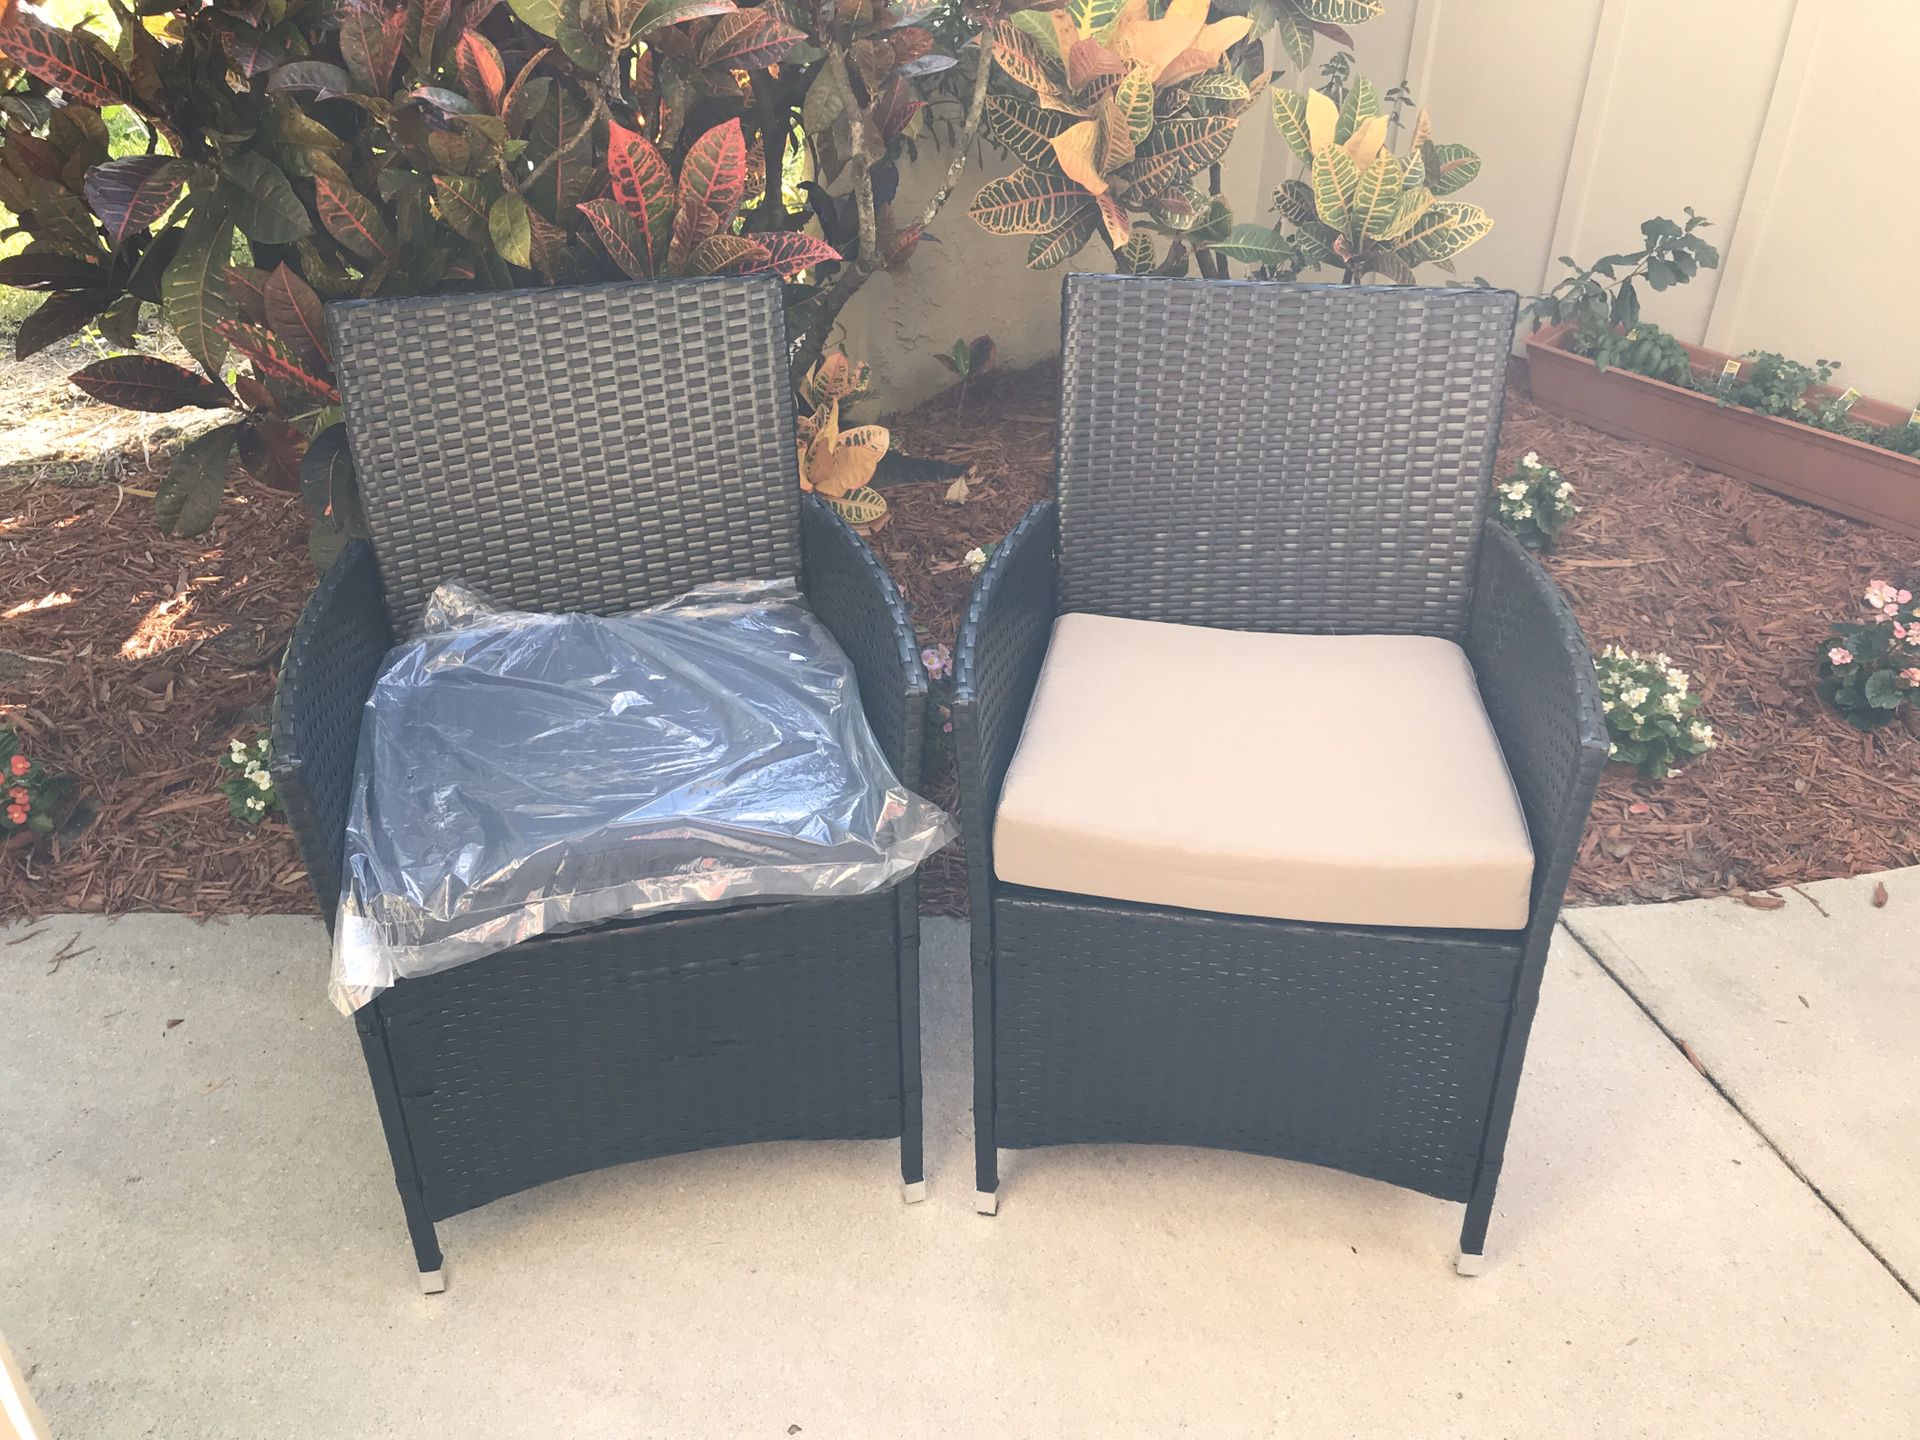 Outdoor Patio Chairs $50 a pc brand new fully assembled